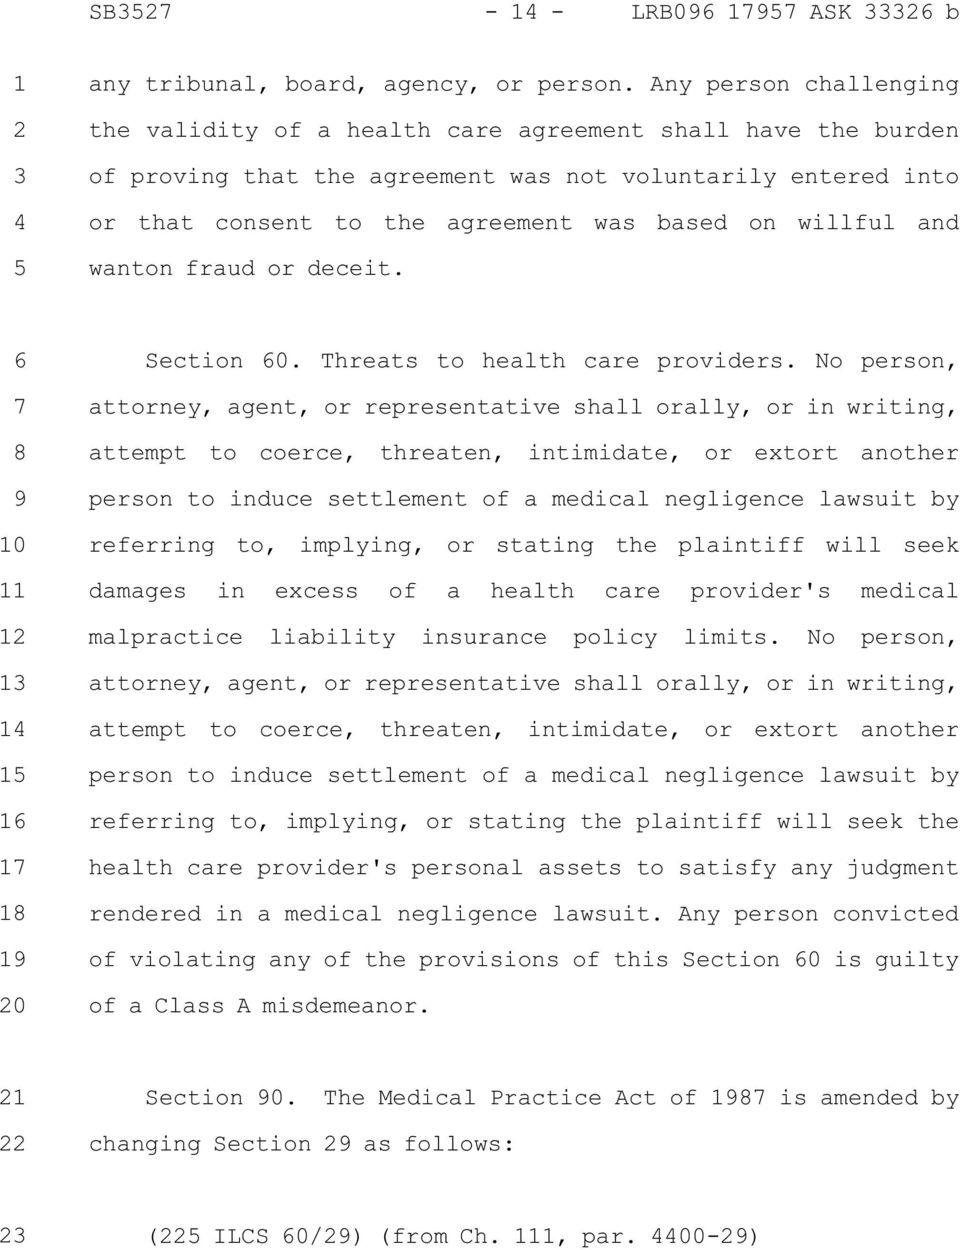 willful and wanton fraud or deceit. 0 0 Section 0. Threats to health care providers.